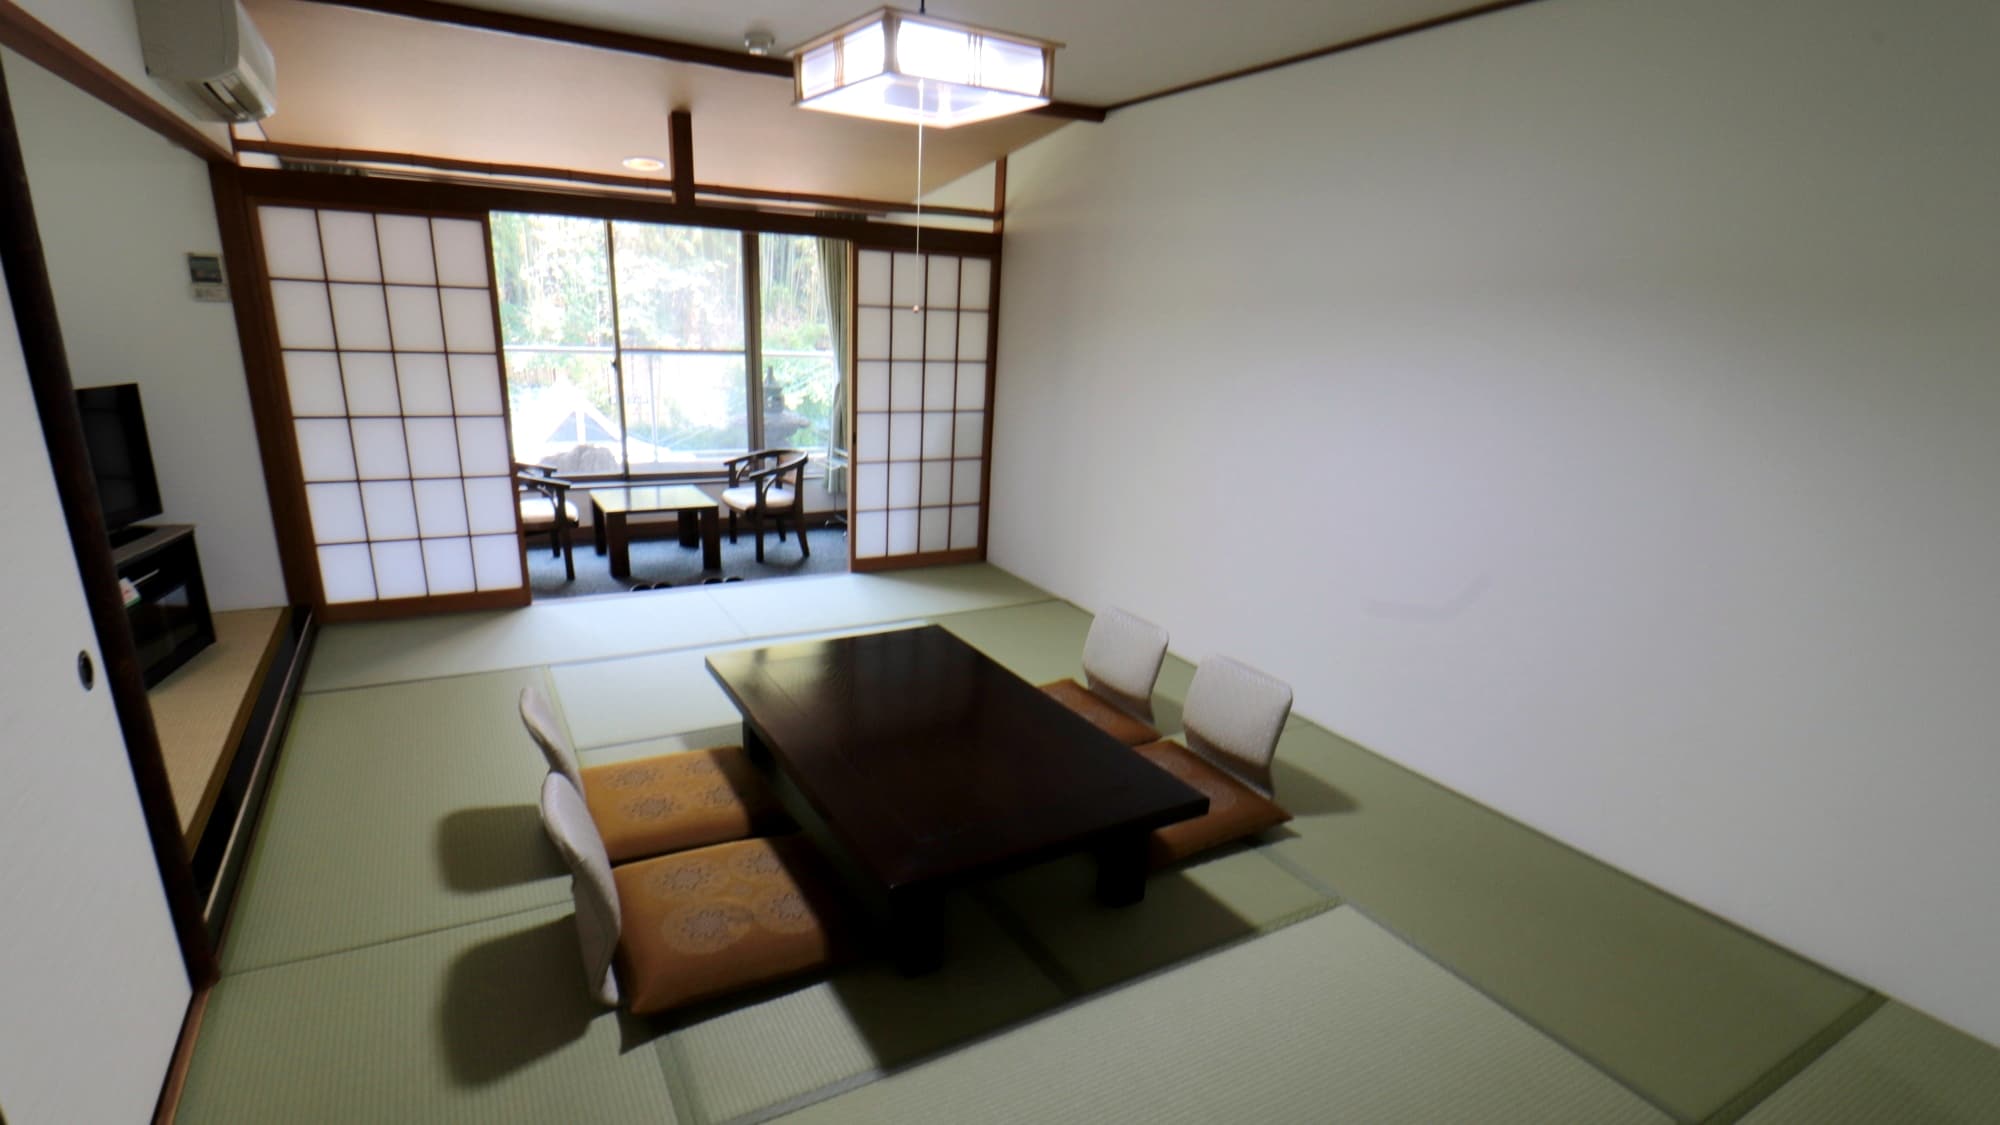 West Building 12 tatami mats: There are various types of rooms depending on the number of people in a group or family.